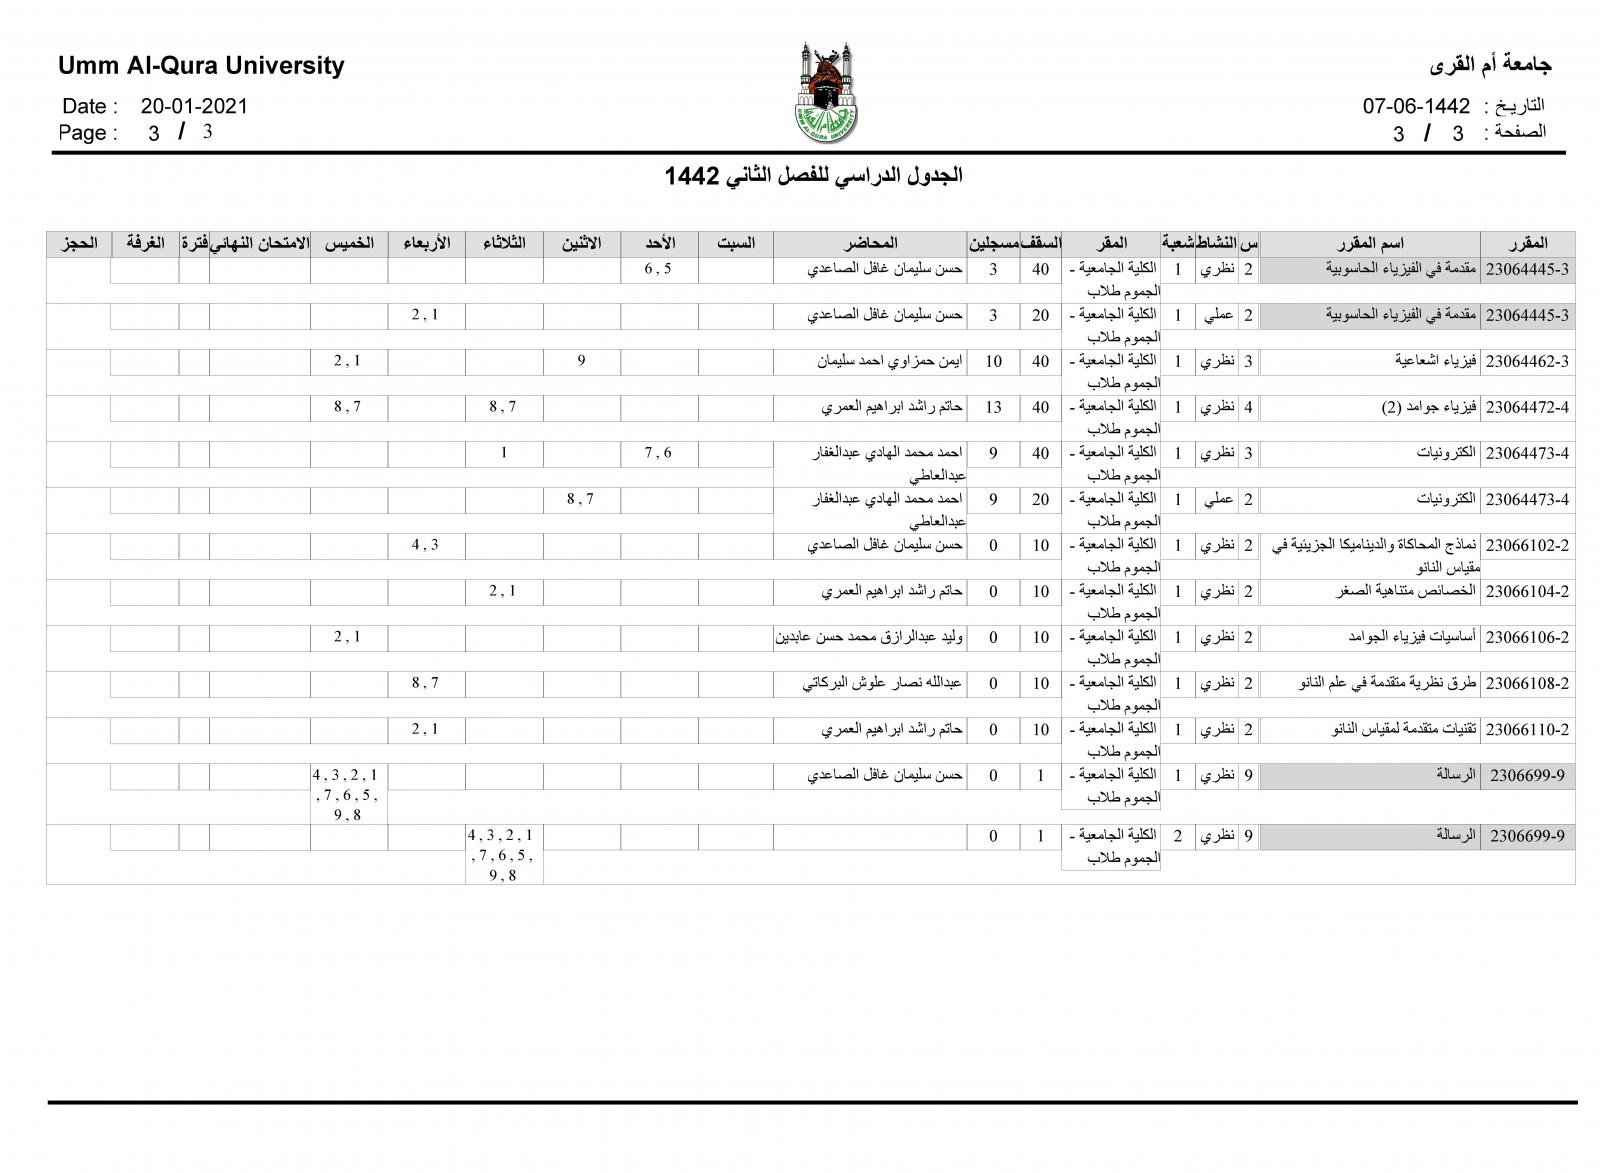 Academic Schedule for the Second Term of the Academic Year 1442 A.H